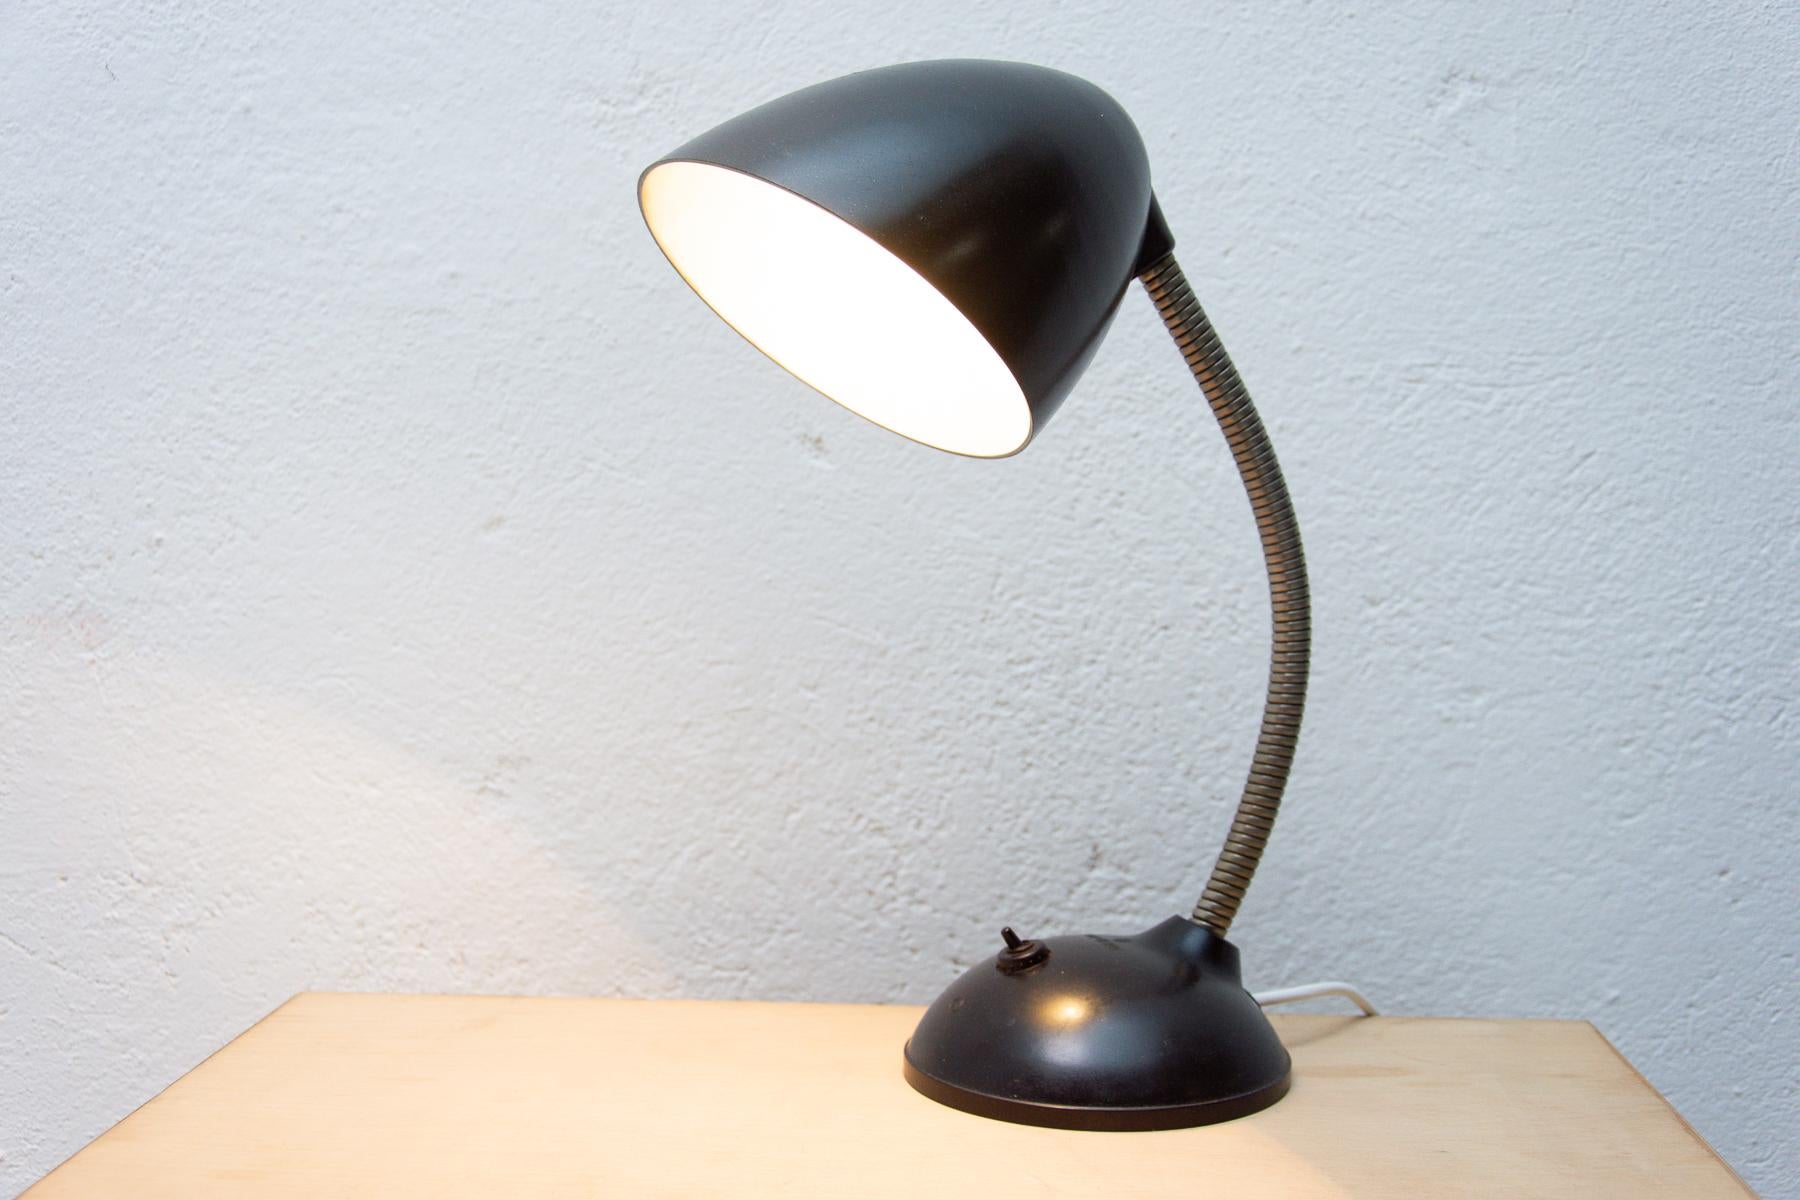 The design of this bakelite table lamp comes from Great Britain. This gooseneck lamp was designed By Eric Kirkman Cole for the Czech republic market.
The production was then provided by the company Elektrosvit in the territory of the former